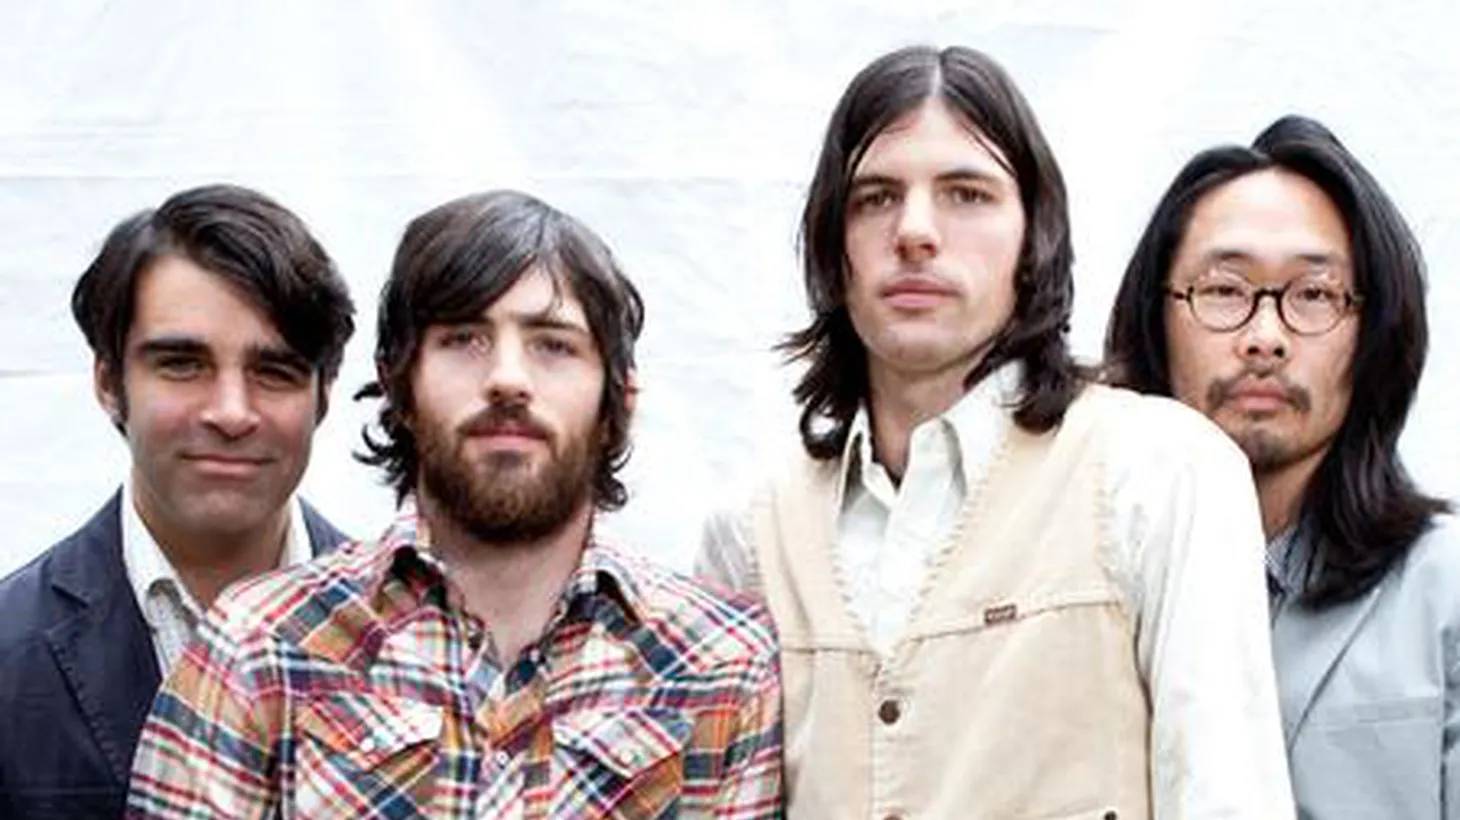 After years of enjoying songs from North Carolina's Avett Brothers, we're proud to feature a live session on Morning Becomes Eclectic with the group. If their new record is any indication-- it promises to be stellar. Join us at 11:15am.